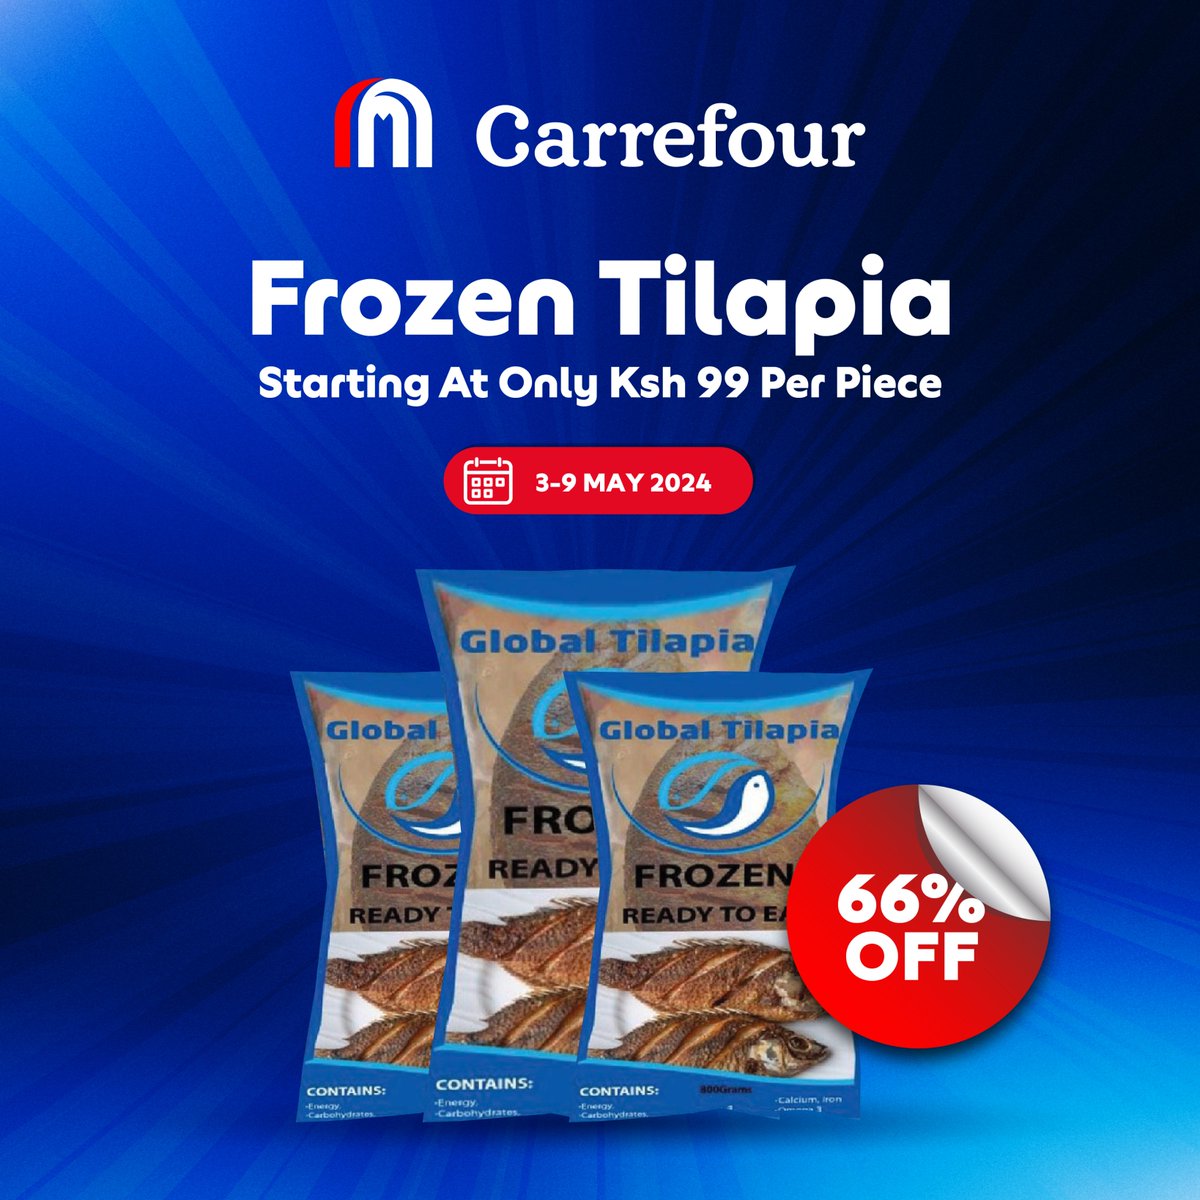 Enjoy a whopping 66% off on fresh, ready-to-eat tilapia starting today until May 9th. Don't miss out on this incredible deal, available exclusively at Carrefour. Catch it while you can!

#CarrefourKenya #GreatMoments
@majidalfuttaim